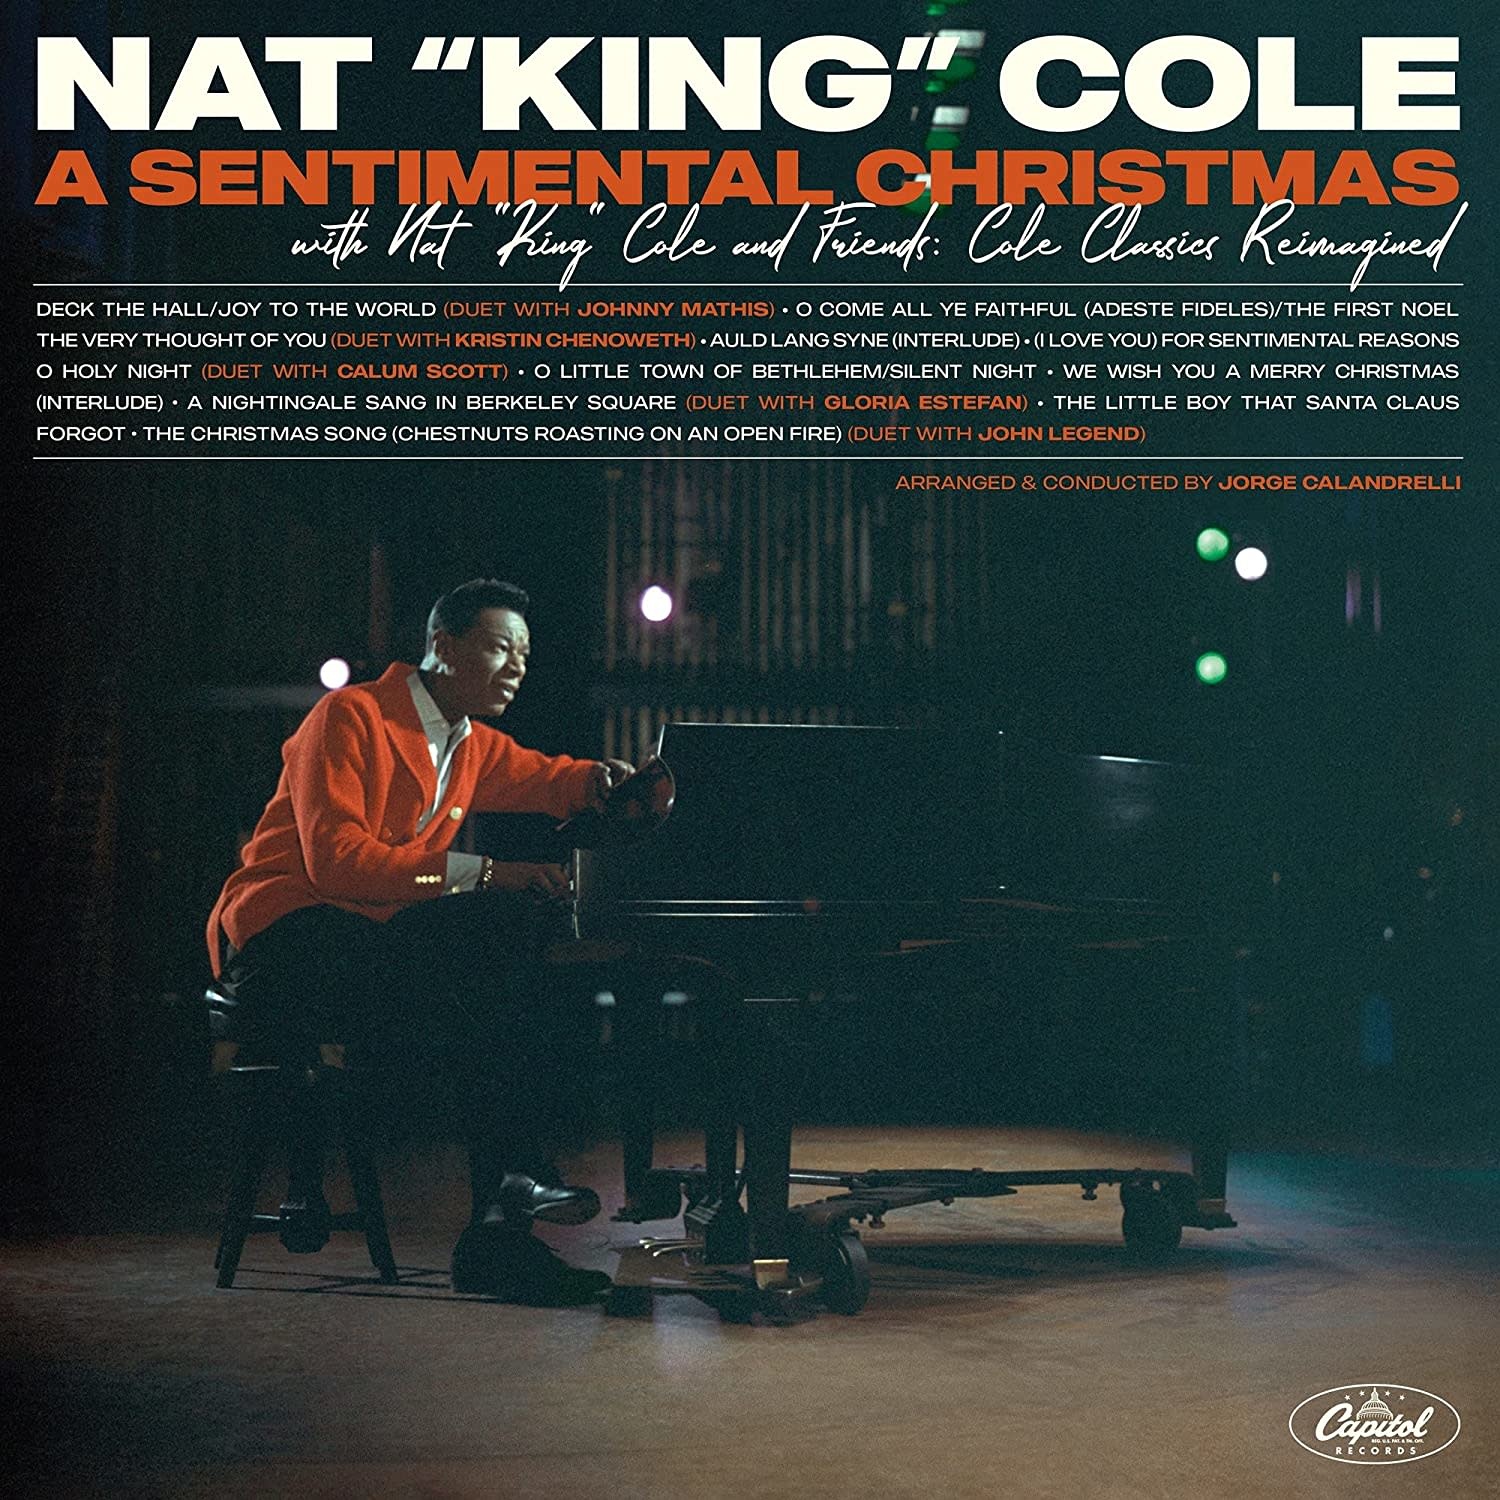 Nat King Cole ‎– A Sentimental Christmas (With Nat King Cole And Friends: Cole Classics Reimagined)